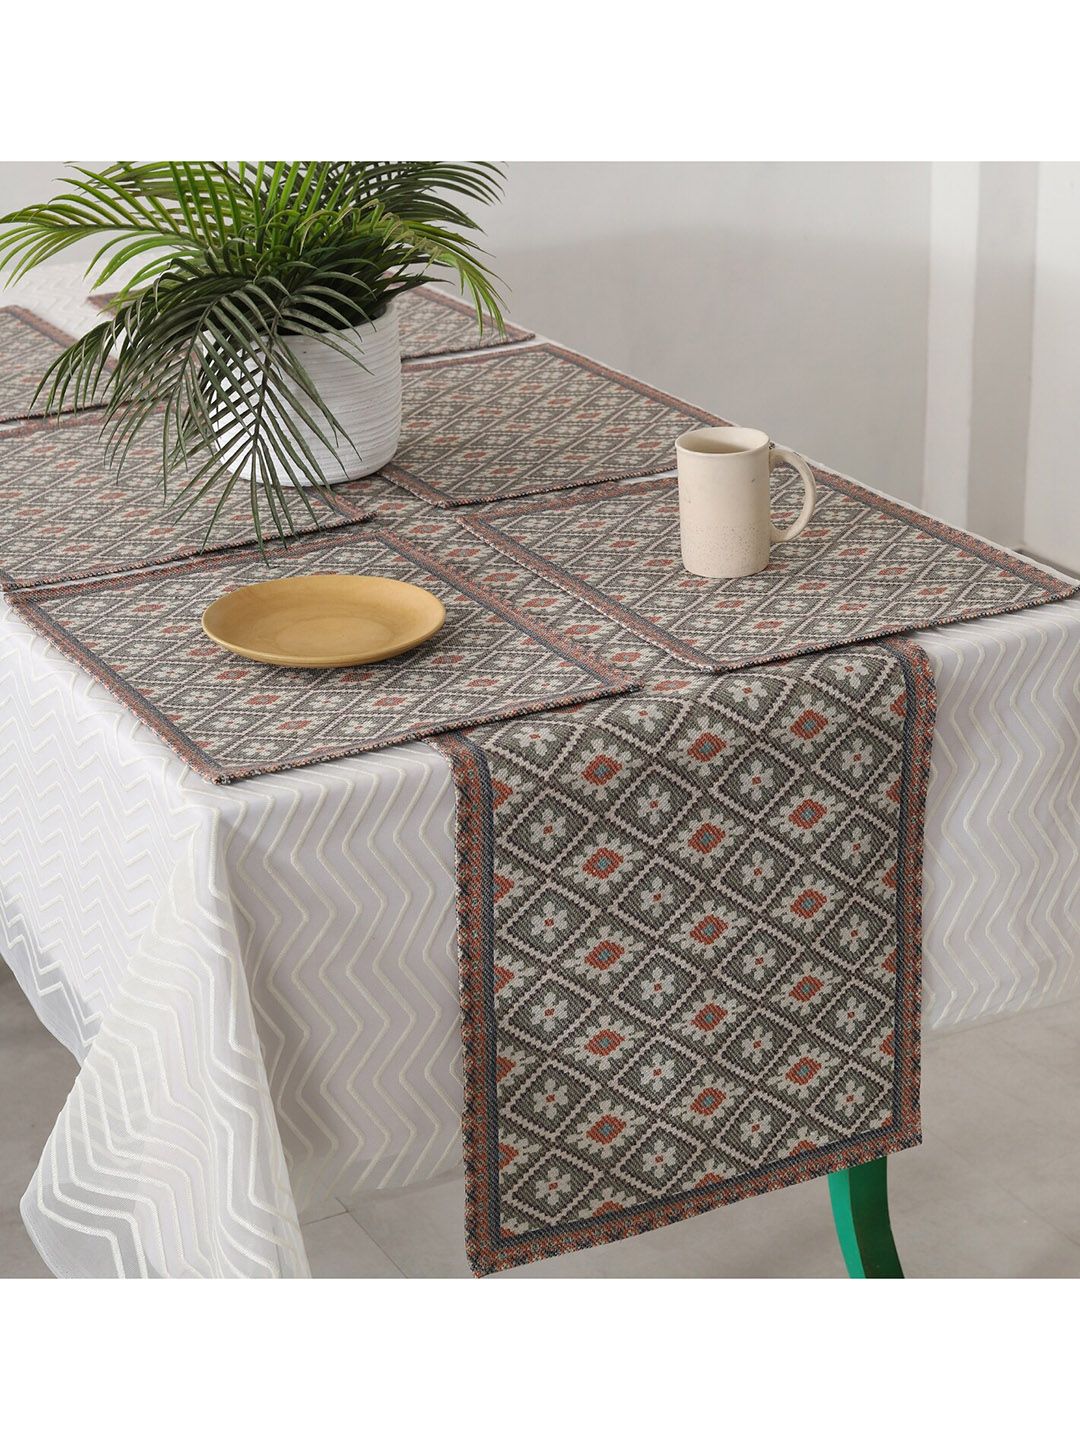 HANDICRAFT PALACE Set Of 7 Green Ikat Printed Table Placemats & Runner Price in India